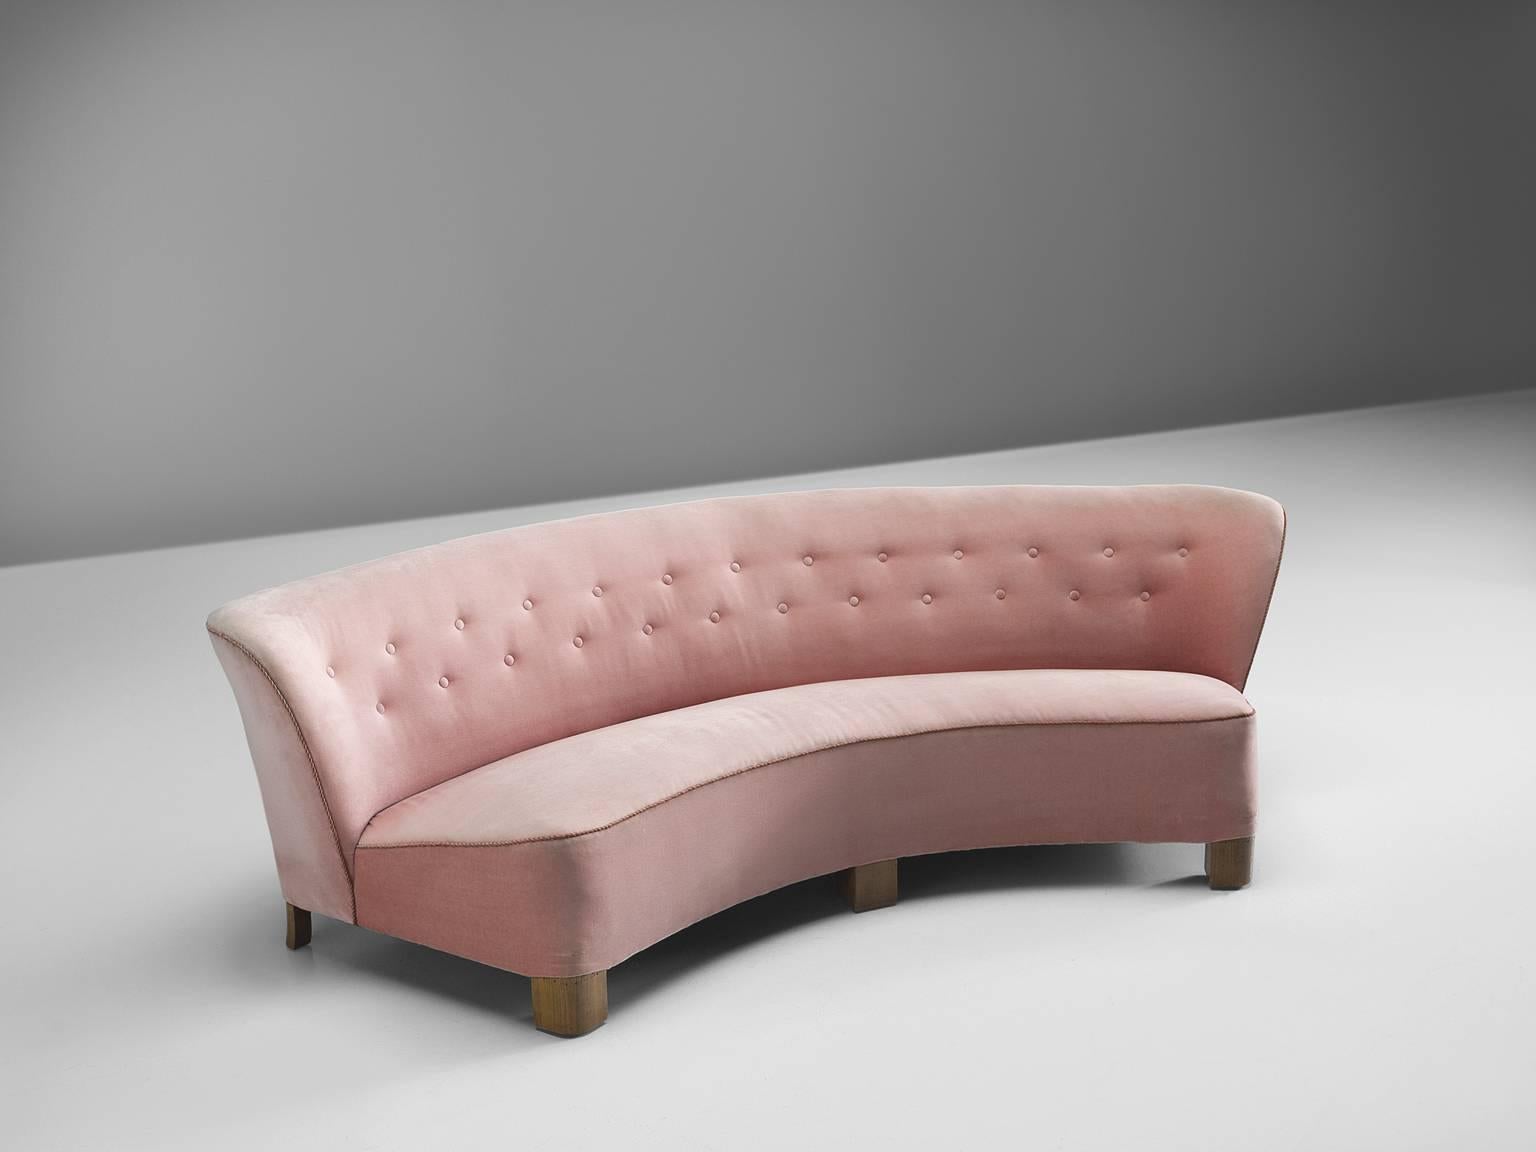 Otto Faærge, sofa, pink fabric, wooden legs, Denmark, 1940

This elegant, curved settee features two quilted lines in the sofa's back. The backrest flows slightly outwards when seen from the seat which is the reason that this sofa has a very dynamic